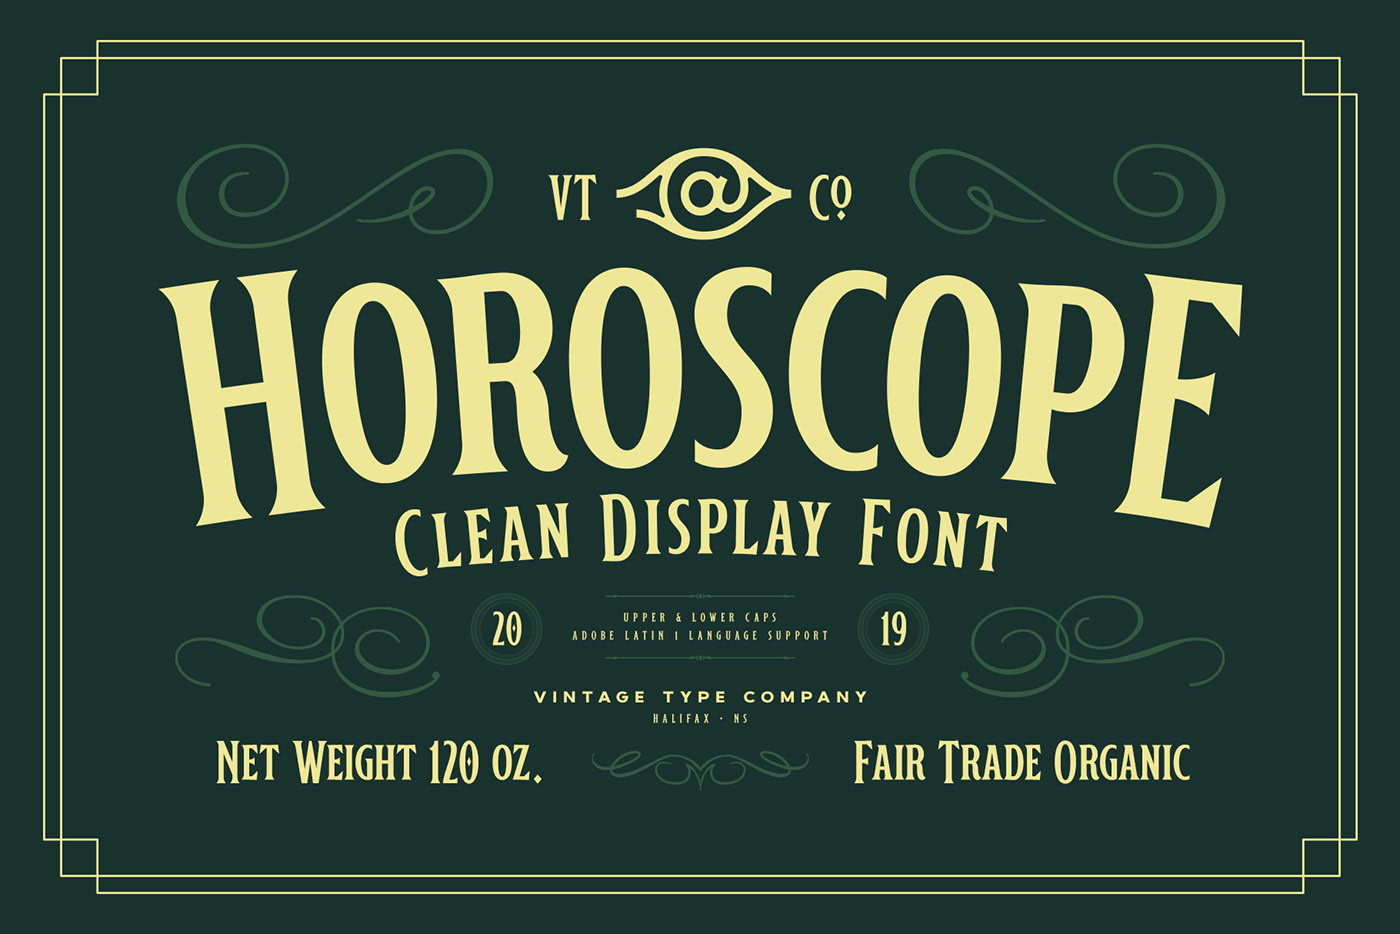 vintage Victorian Horoscope Display font fonts serif bold old horiscope